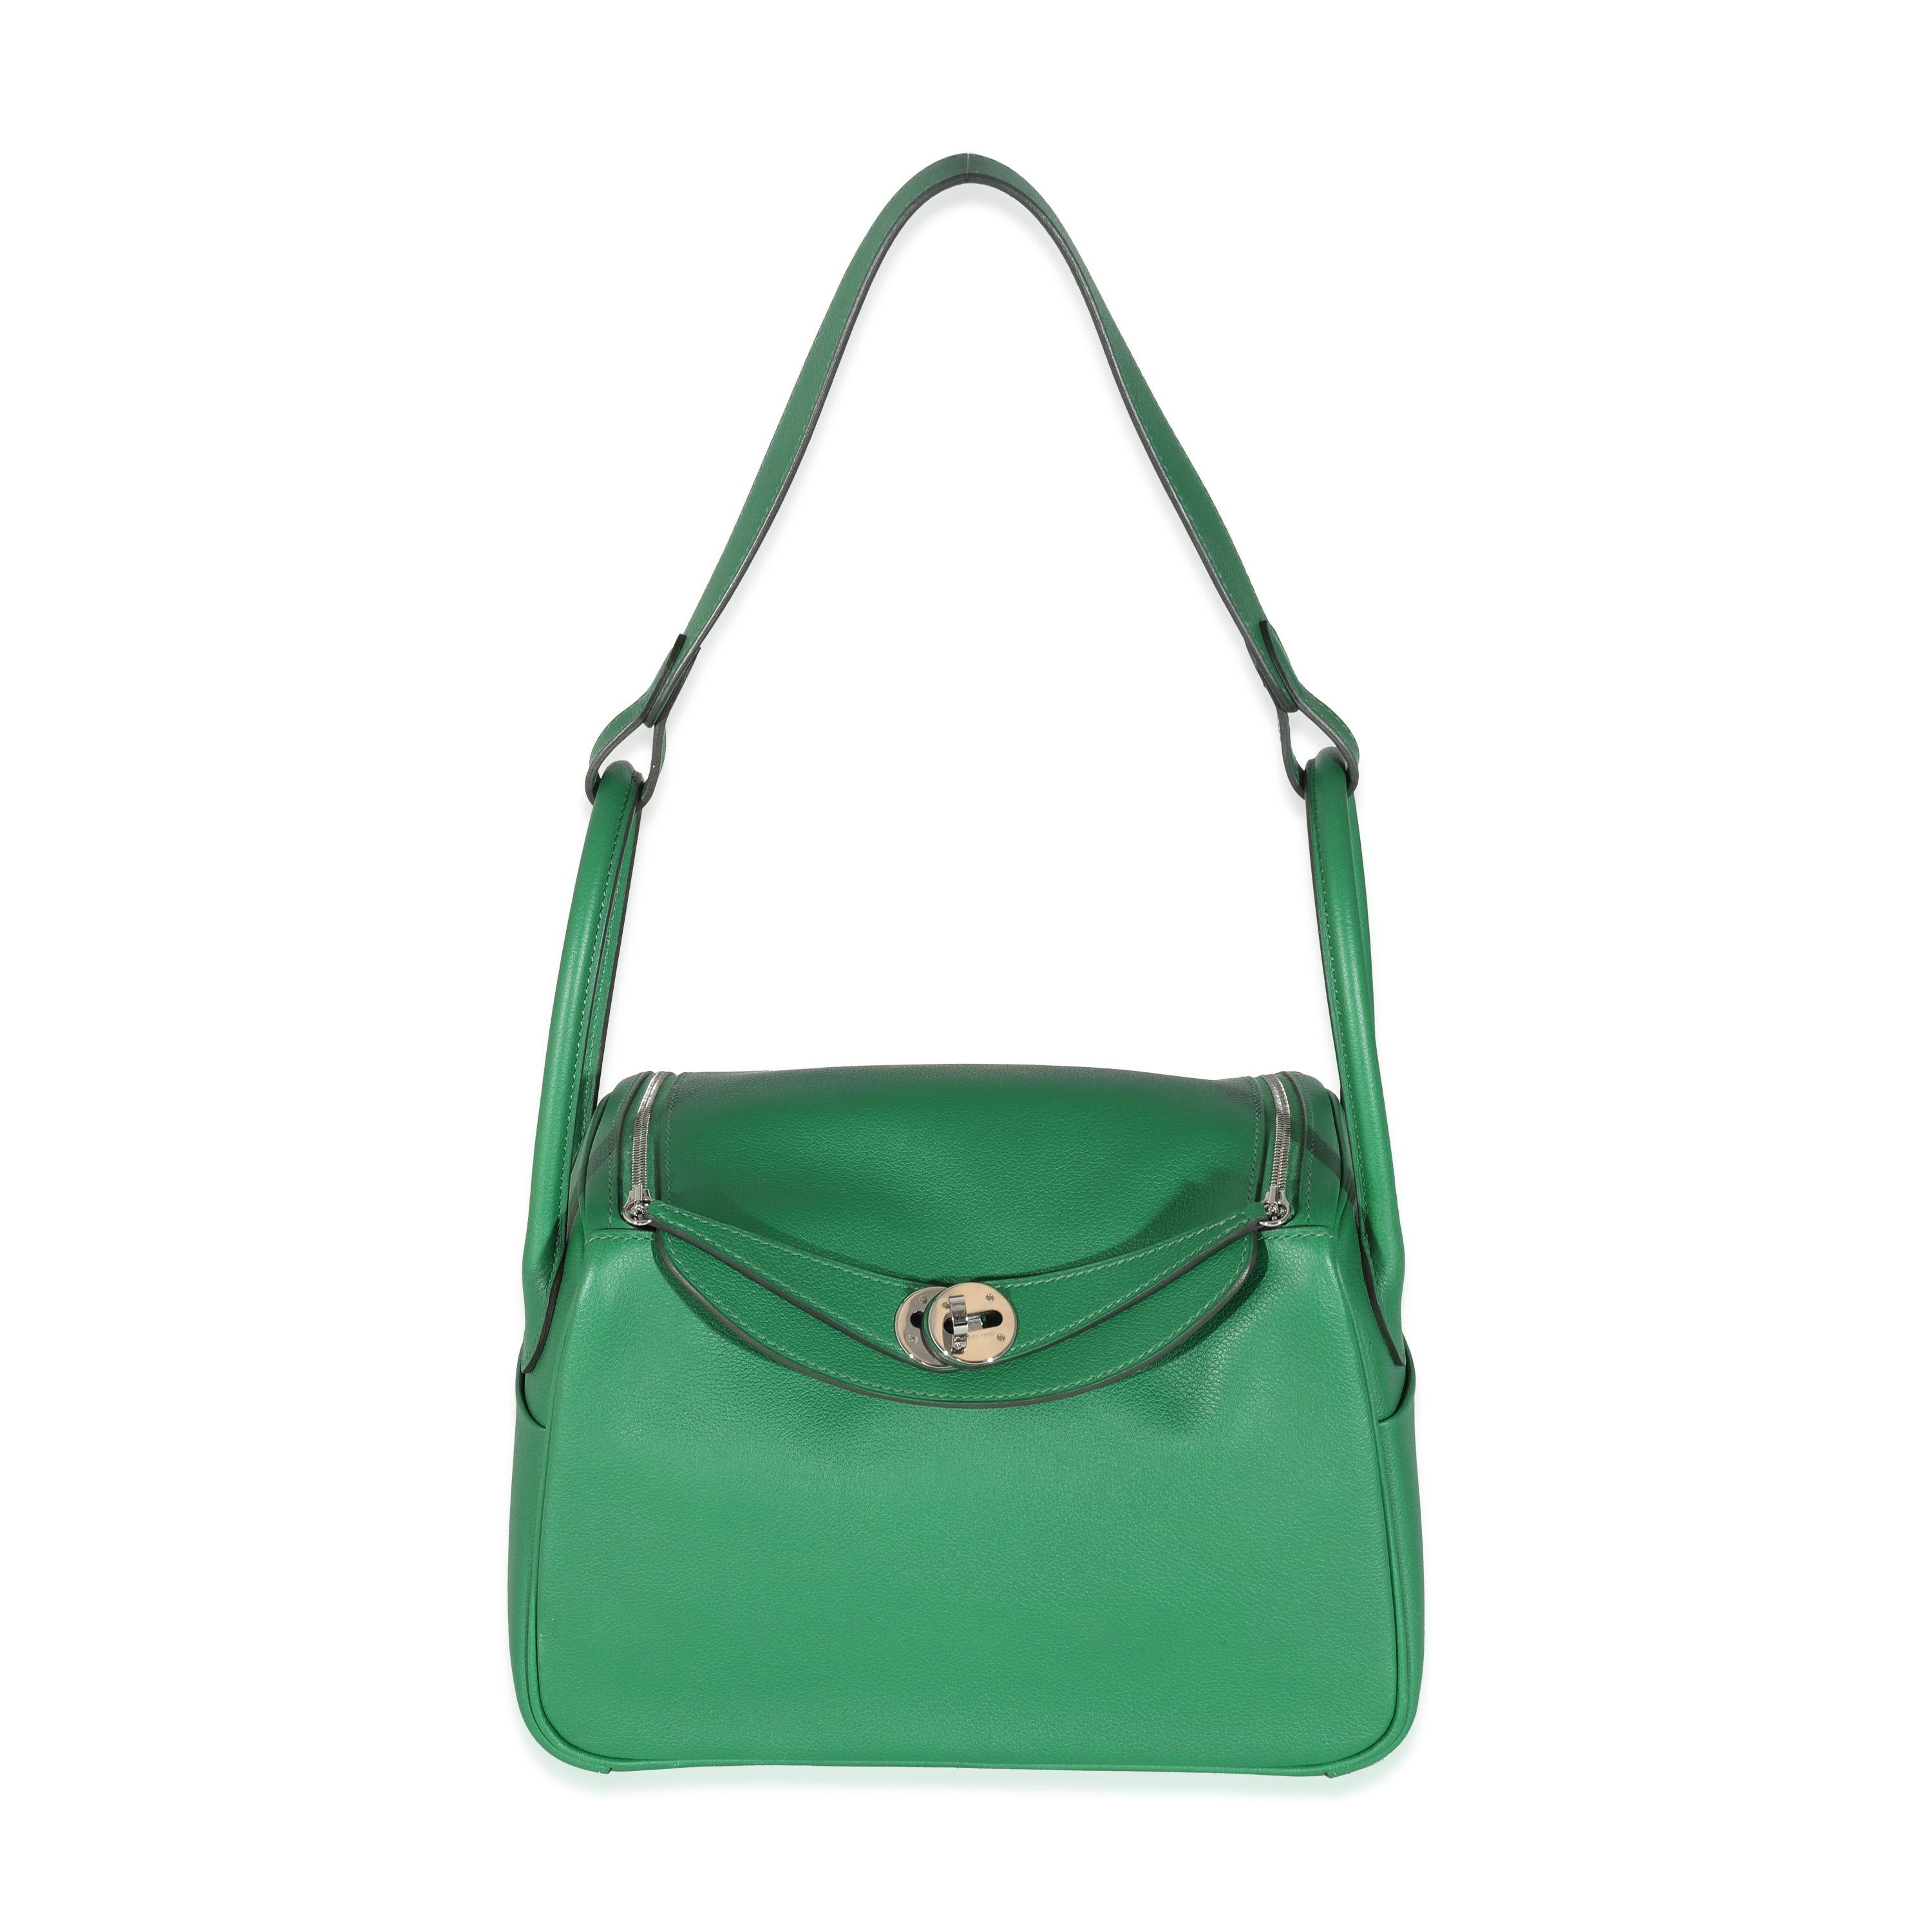 Listing Title: Hermes Cactus Evercolor Lindy 26 PHW
SKU: 131754
Condition: Pre-owned 
Handbag Condition: Excellent
Condition Comments: Item is in excellent condition and displays light signs of wear. plastic along hardware. Scratching to